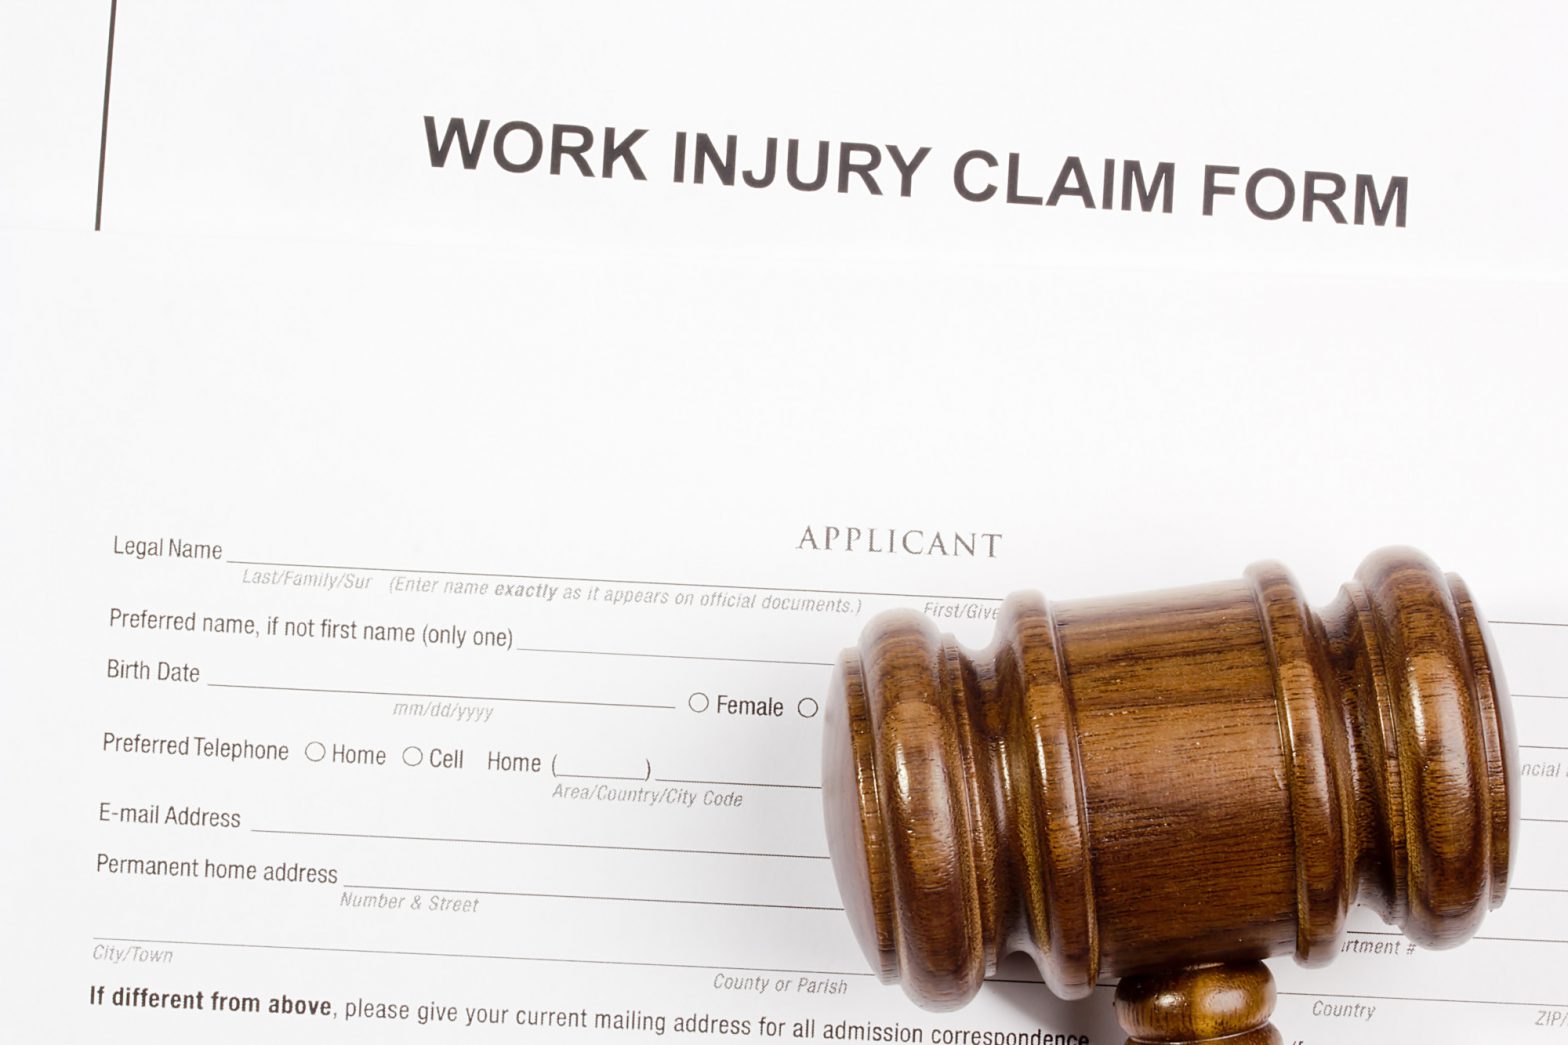 filing a workers compensation claim